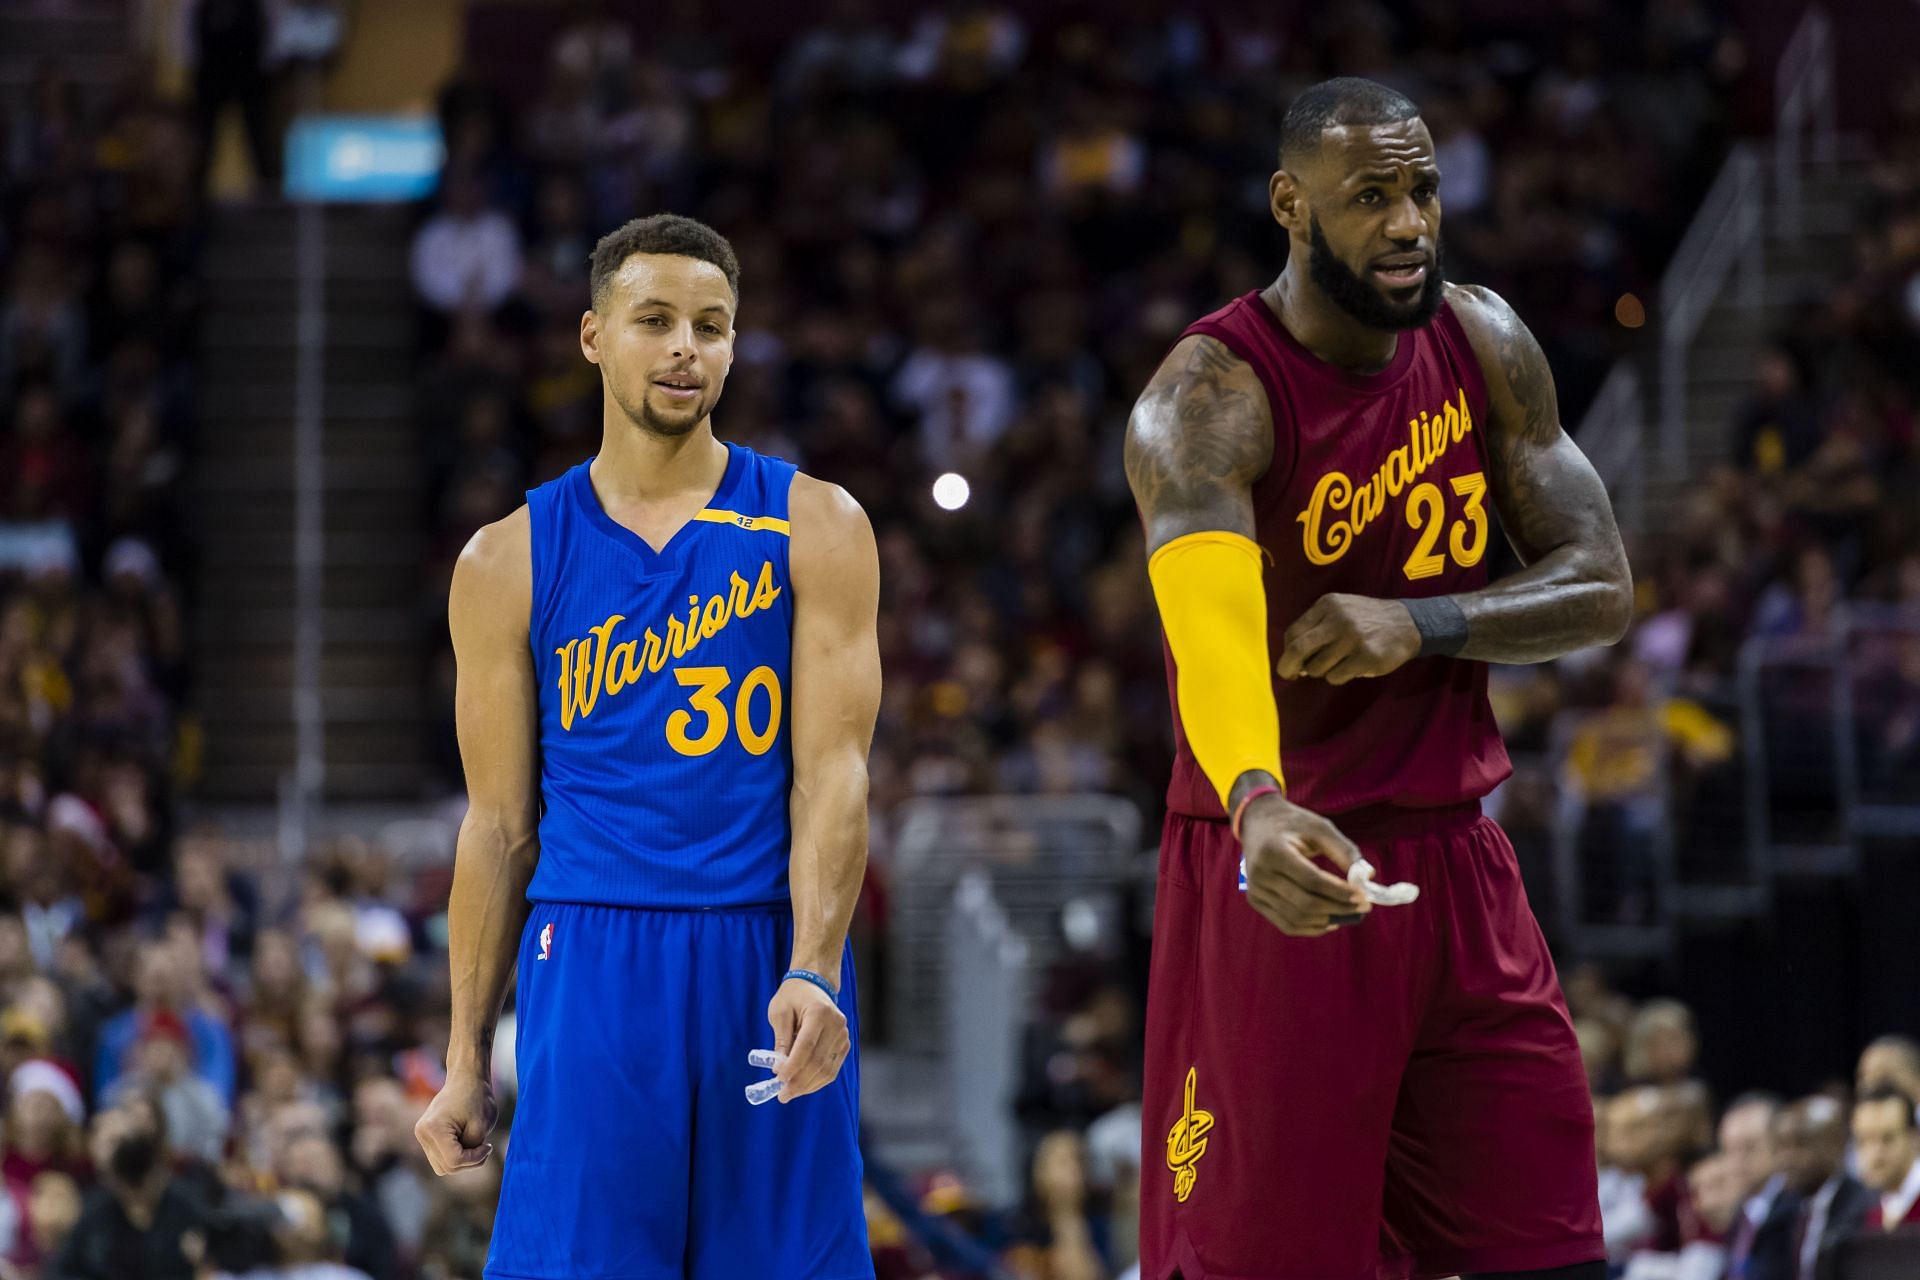 LeBron James and Steph Curry squared off in a most memorable Christmas day showdown in 2016